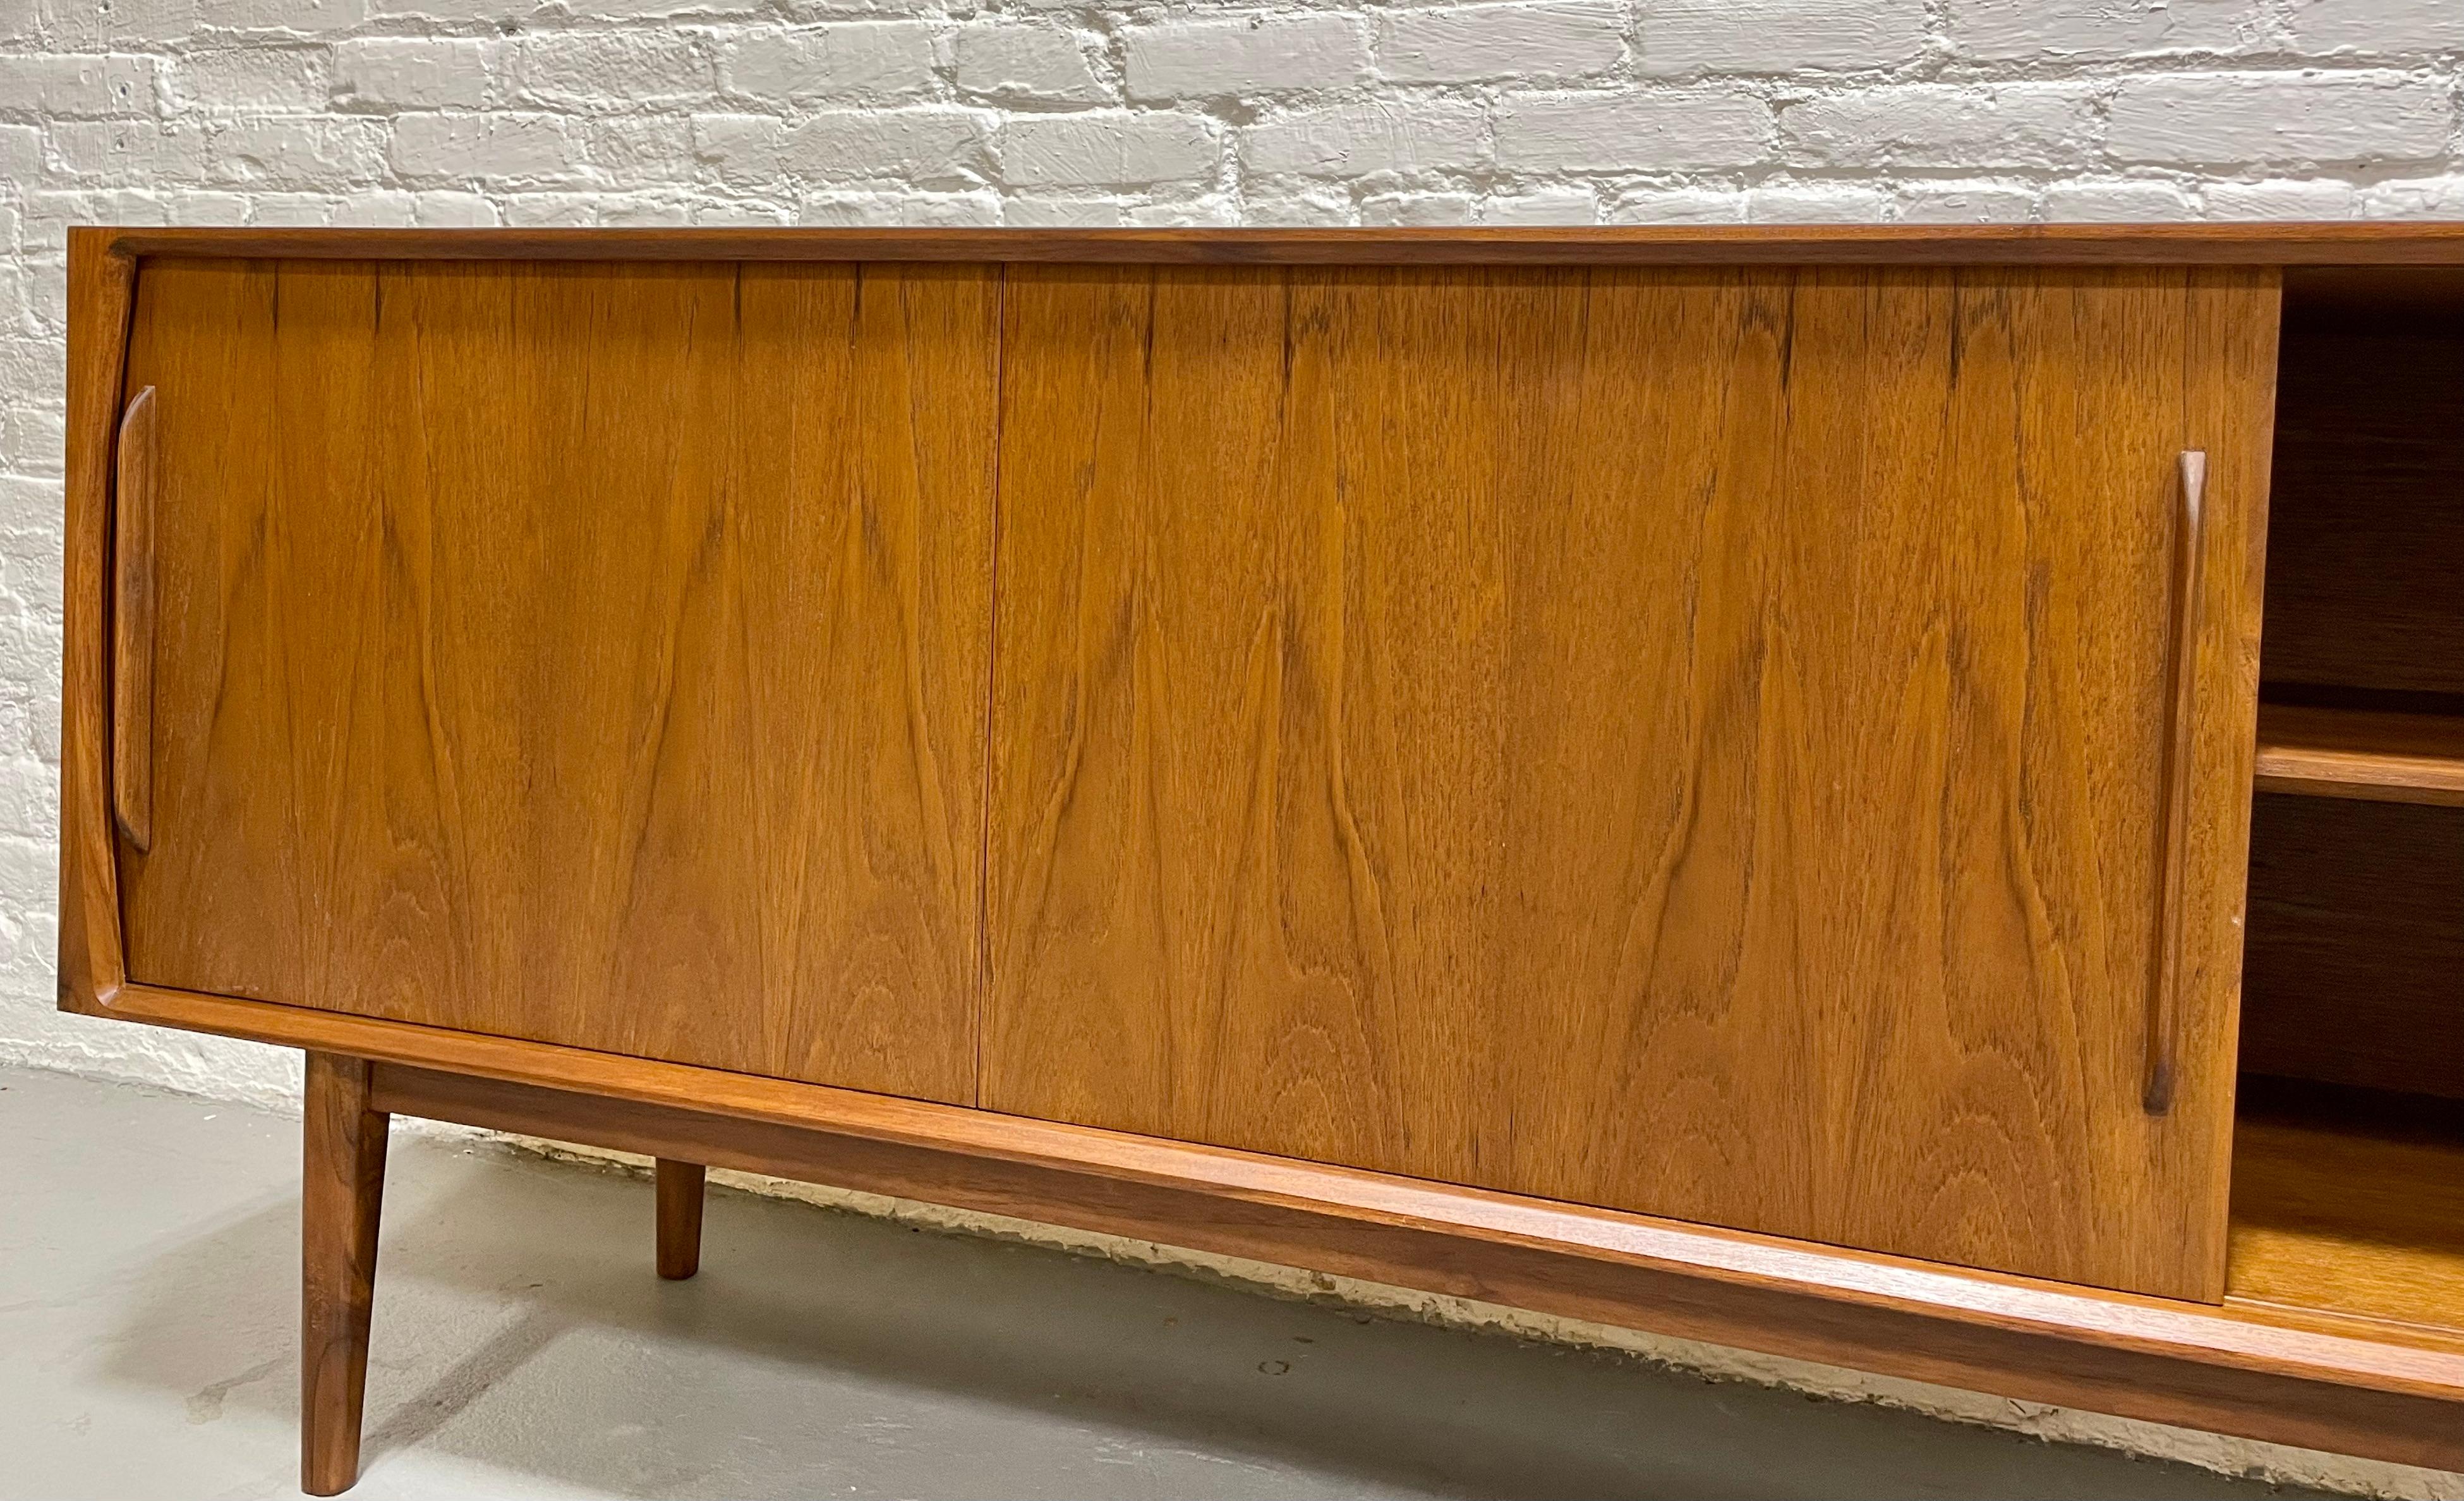 CLASSIC Long Mid Century MODERN styled Danish CREDENZA / Media Stand / Sideboard For Sale 9